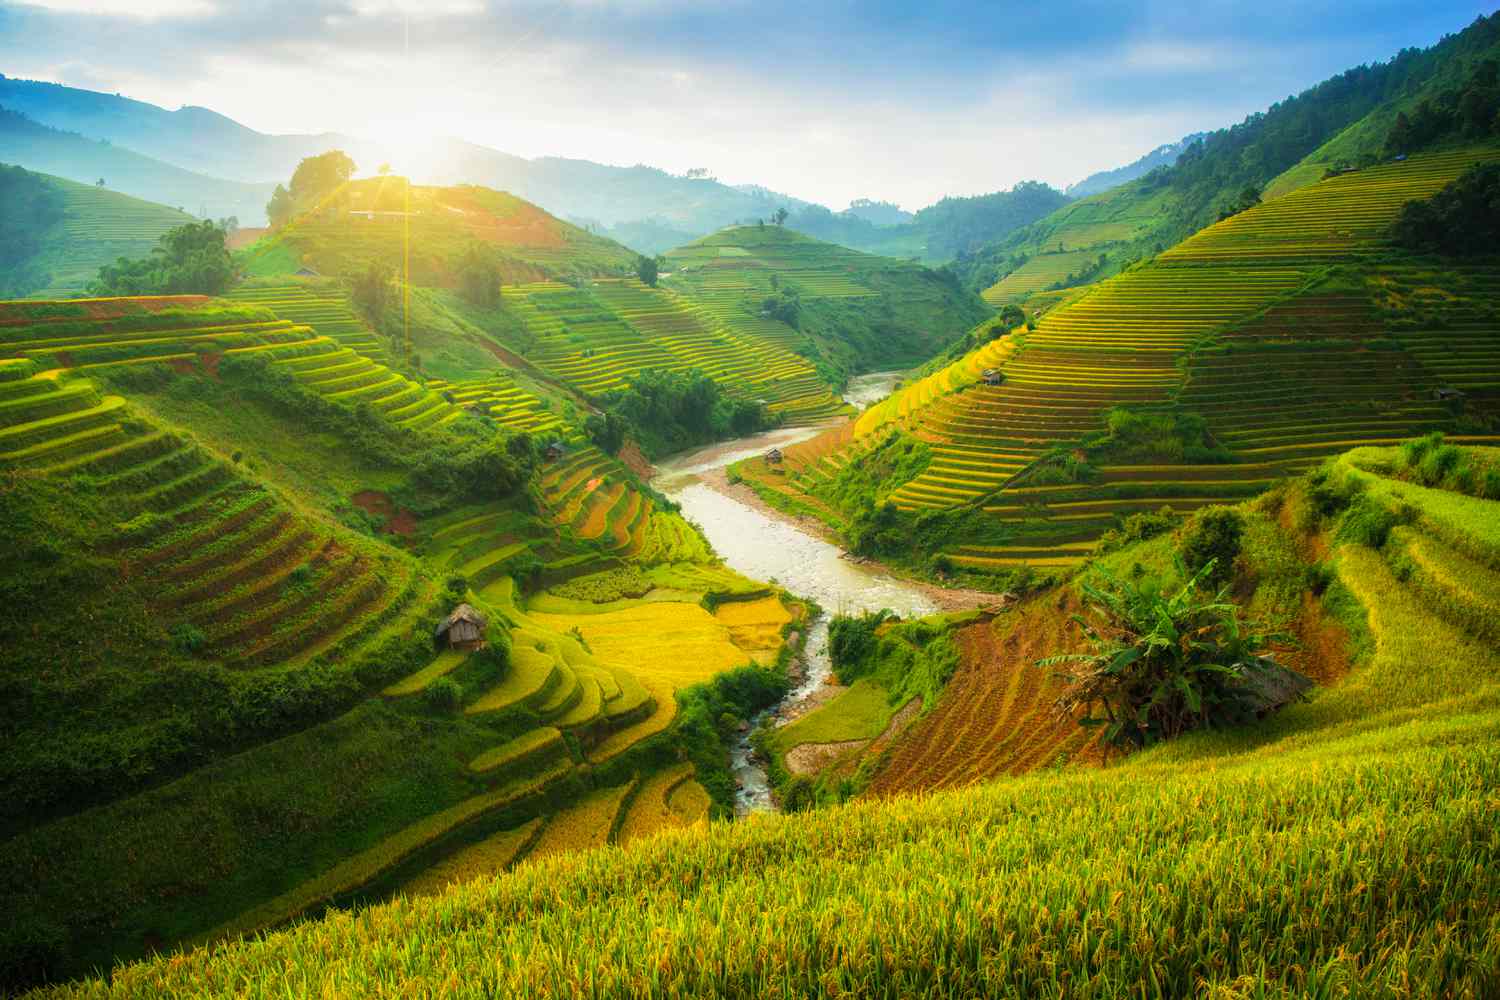 2023 Guide Vietnam Travel for Chinese Tourists